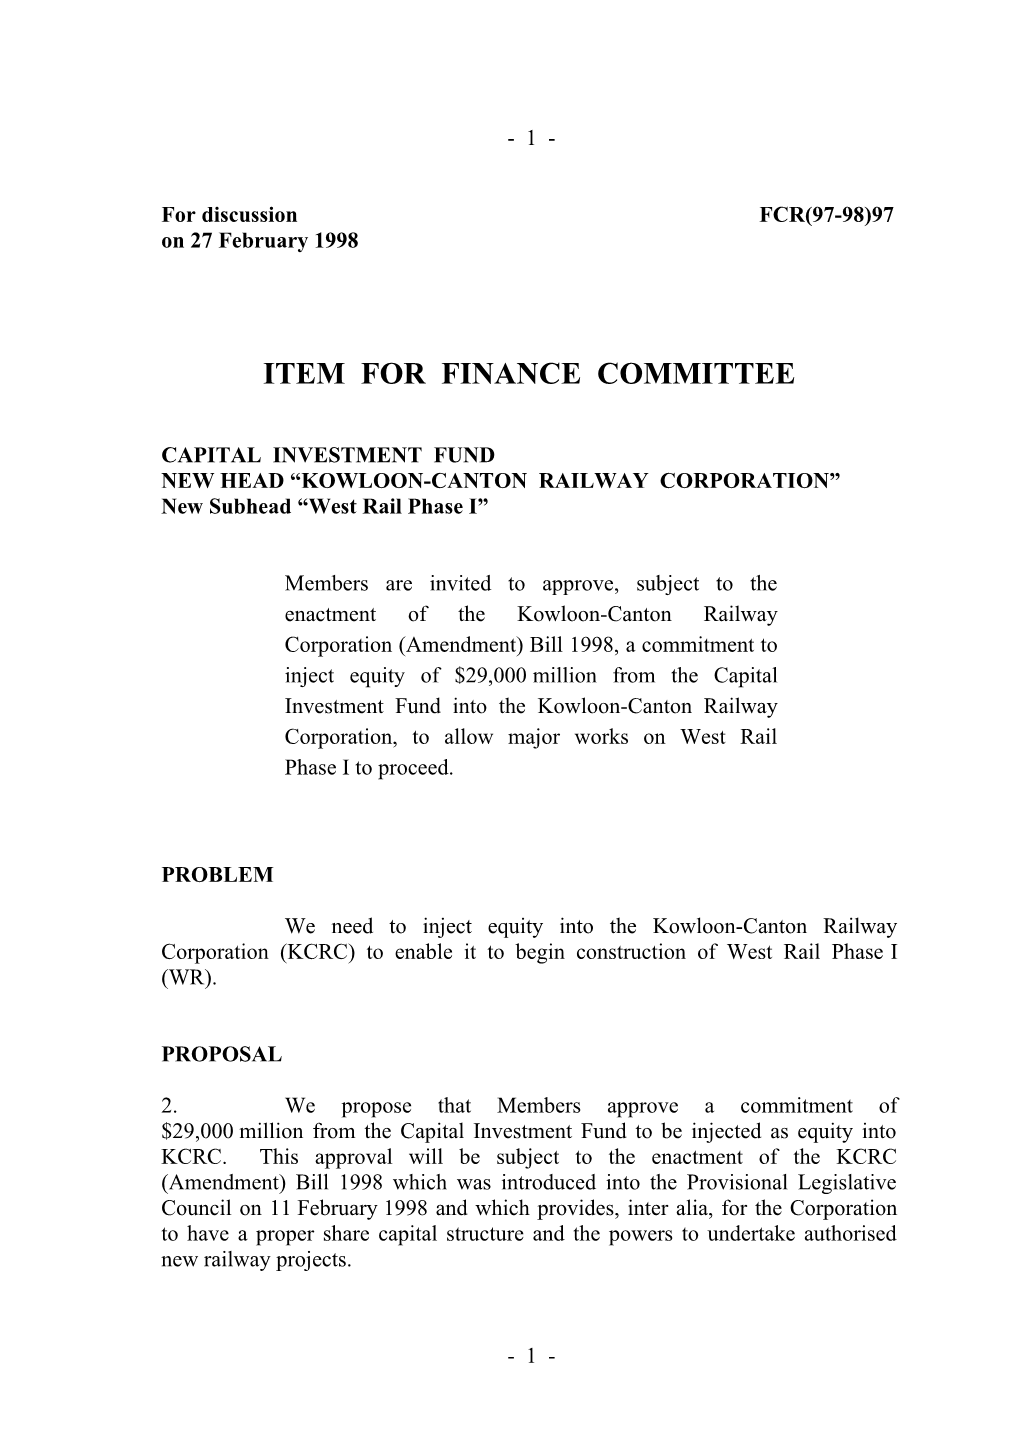 Item for Finance Committee